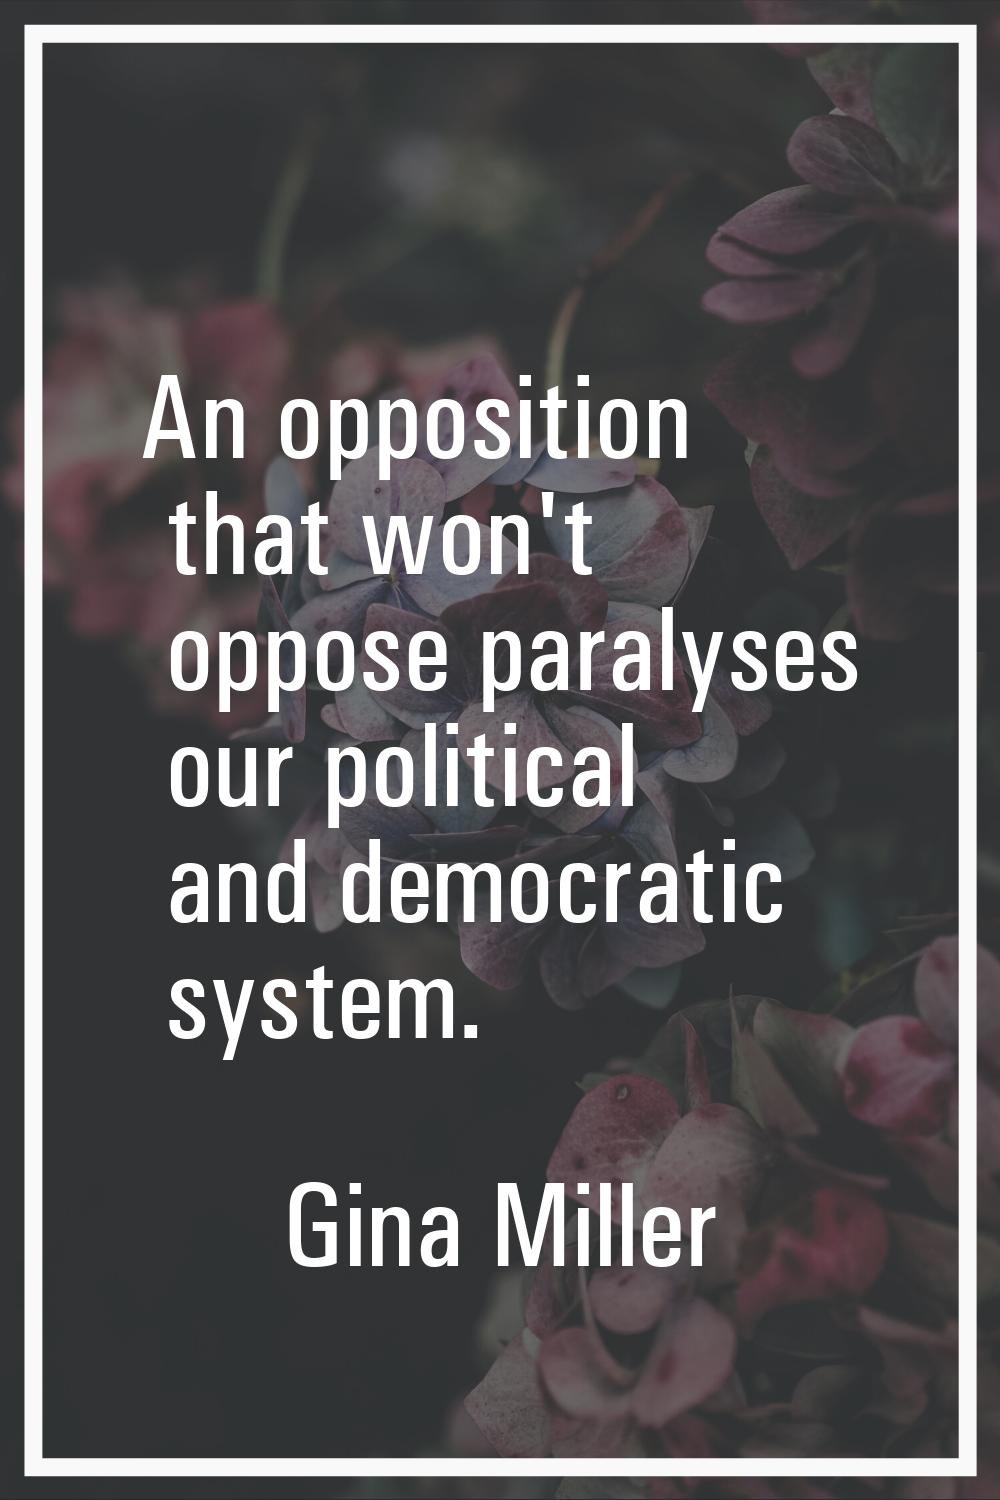 An opposition that won't oppose paralyses our political and democratic system.